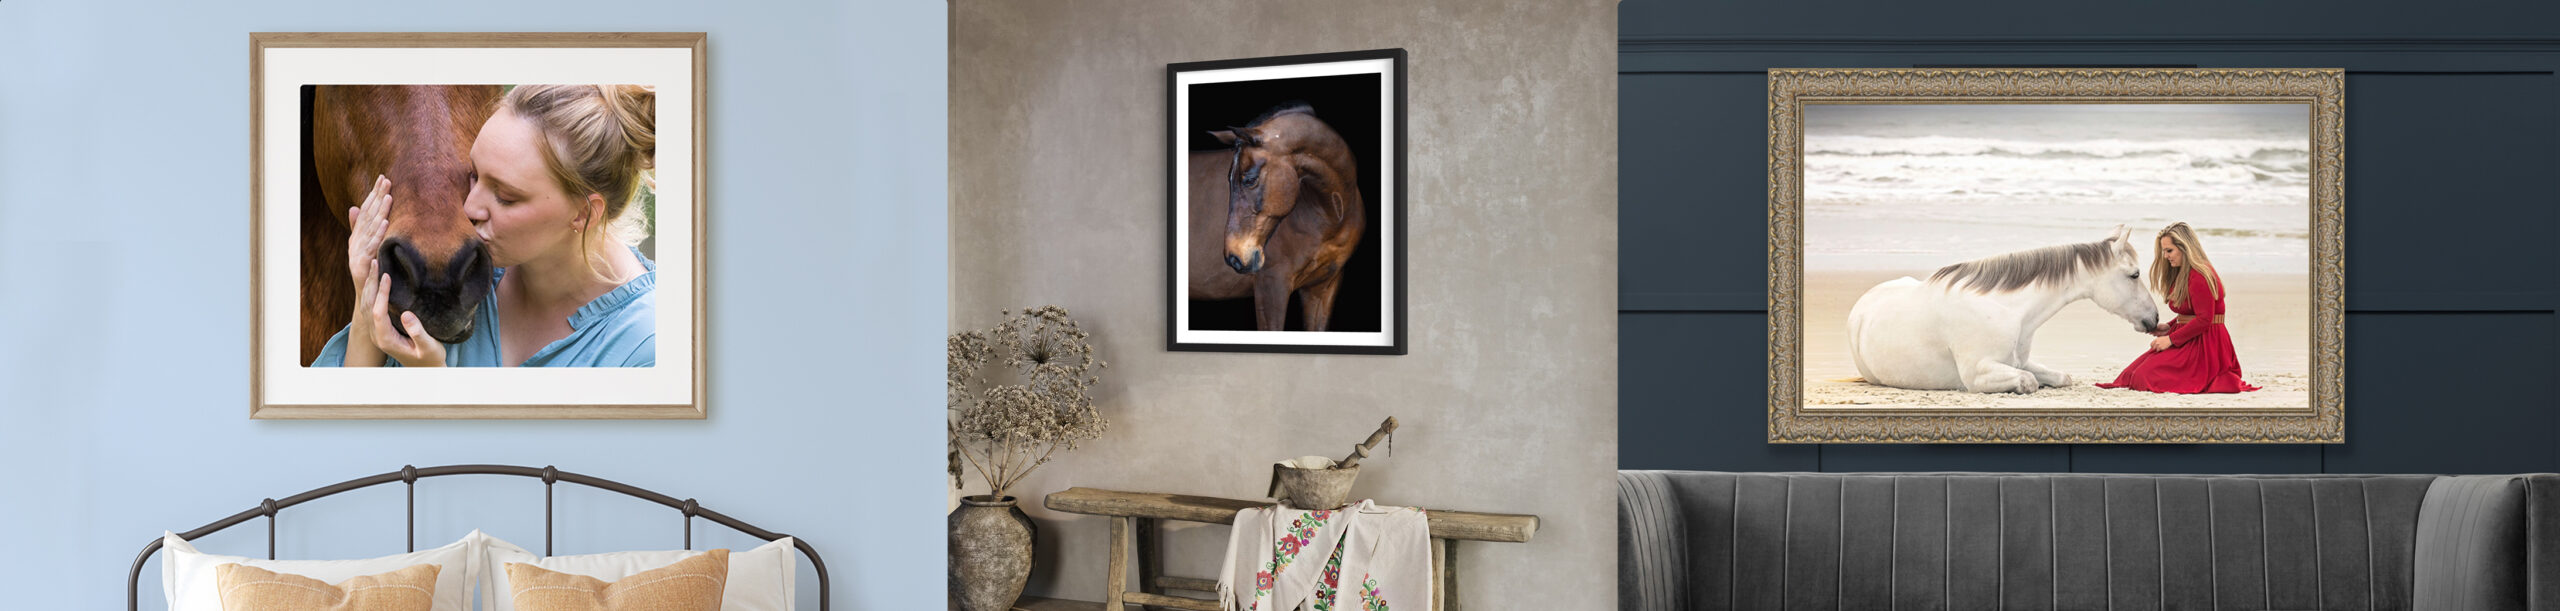 A framed print of a horse and equestrian, a canvas of a horse, and a canvas wall art of a horse and women all hung on walls.